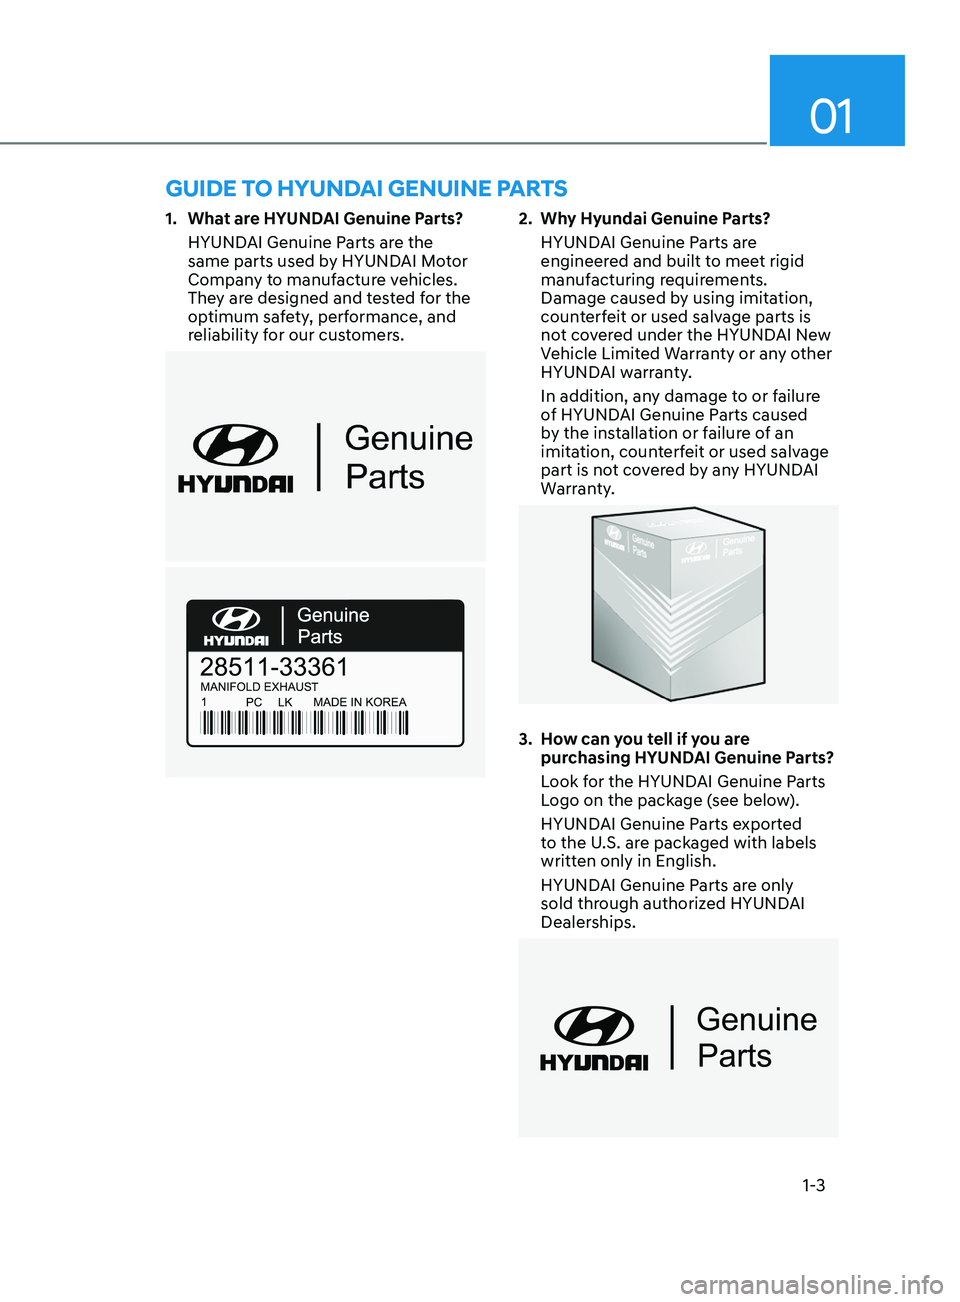 HYUNDAI ELANTRA 2021  Owners Manual 01
1-3
1. What are HYUNDAI Genuine Parts?
HYUNDAI Genuine Parts are the 
same parts used by HYUNDAI Motor 
Company to manufacture vehicles. 
They are designed and tested for the 
optimum safety, perfo